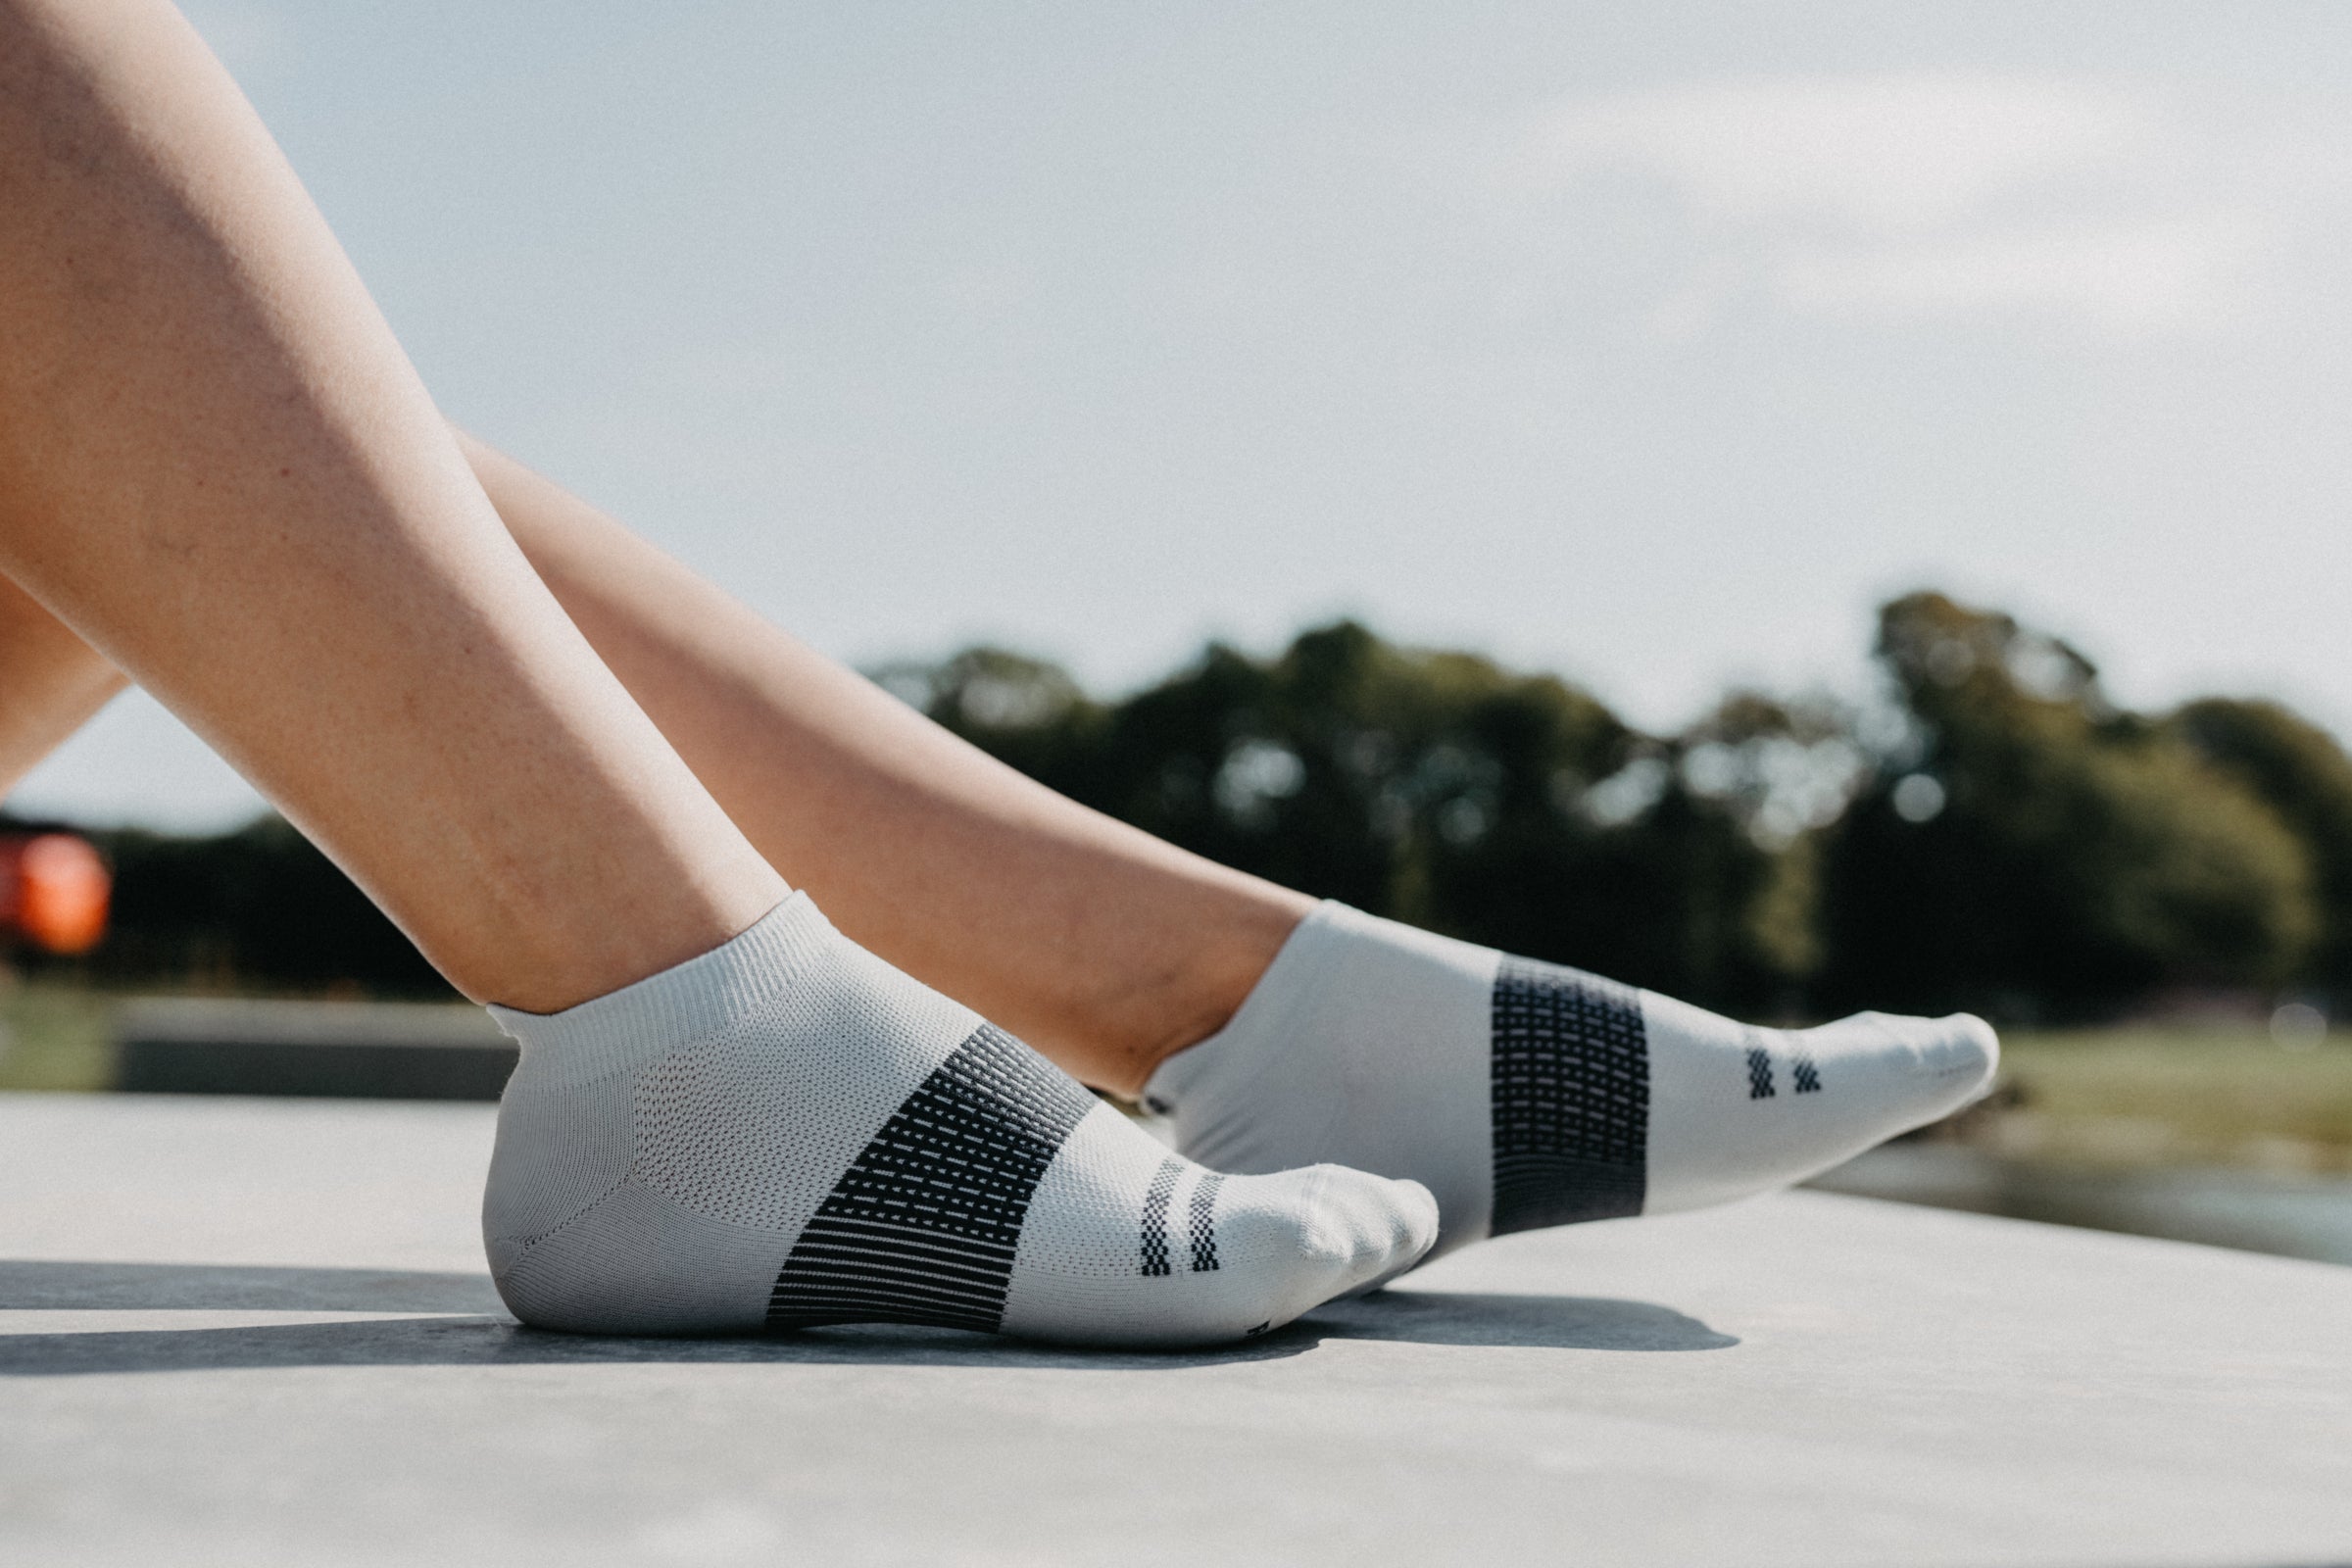 A person's lower legs and feet wearing Rockay Accelerate socks, positioned side by side on a concrete surface outdoors